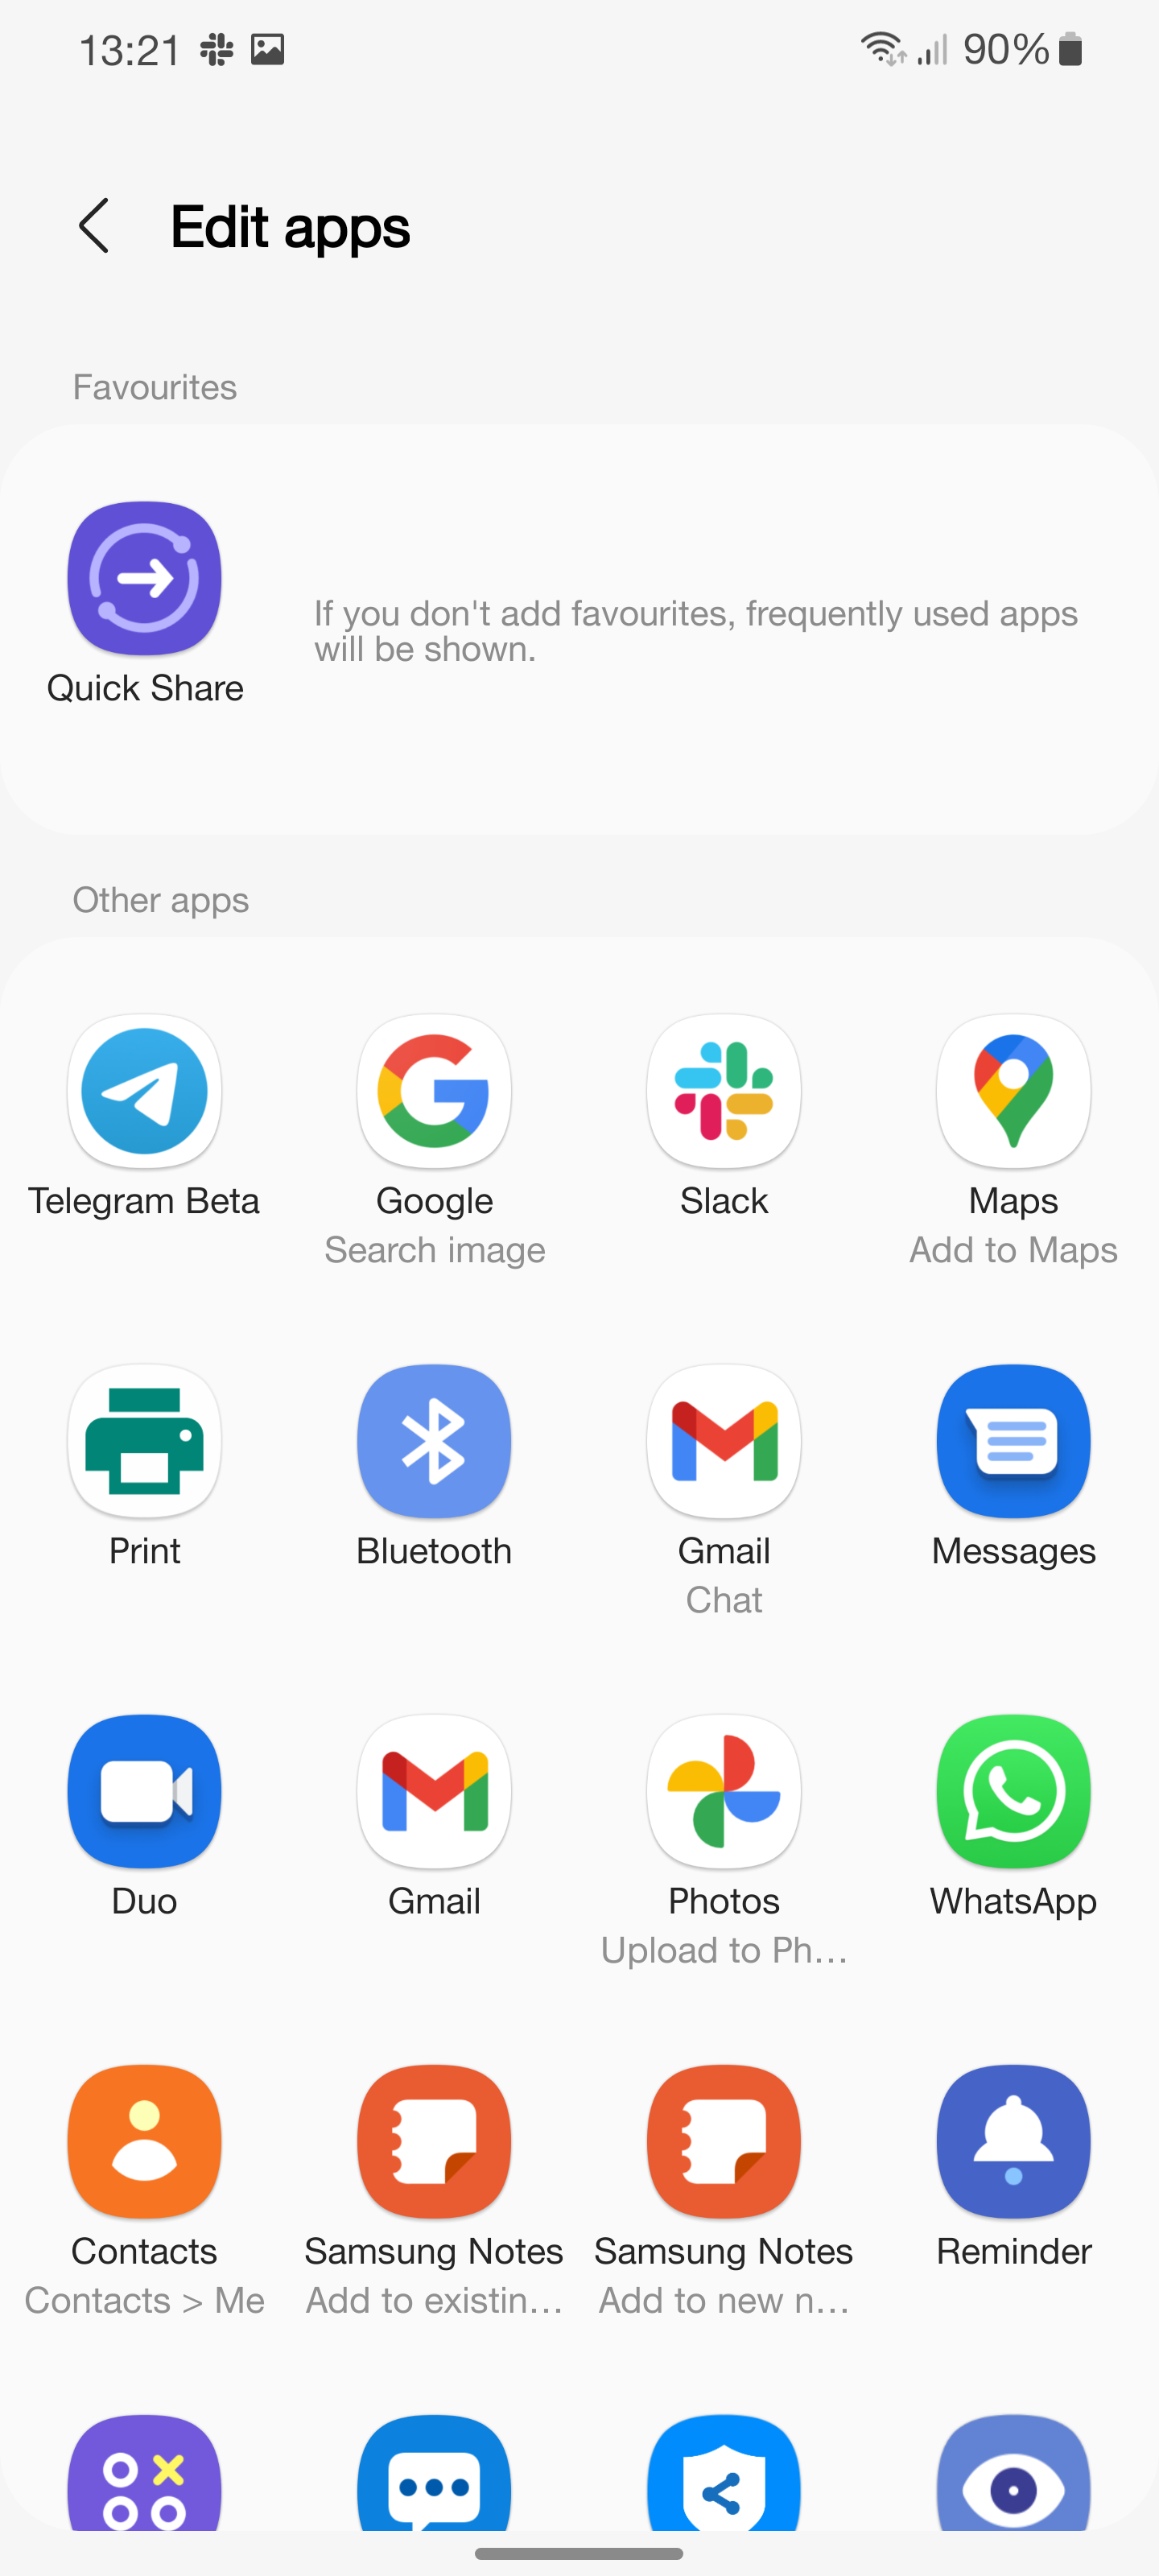 edit apps in quick share